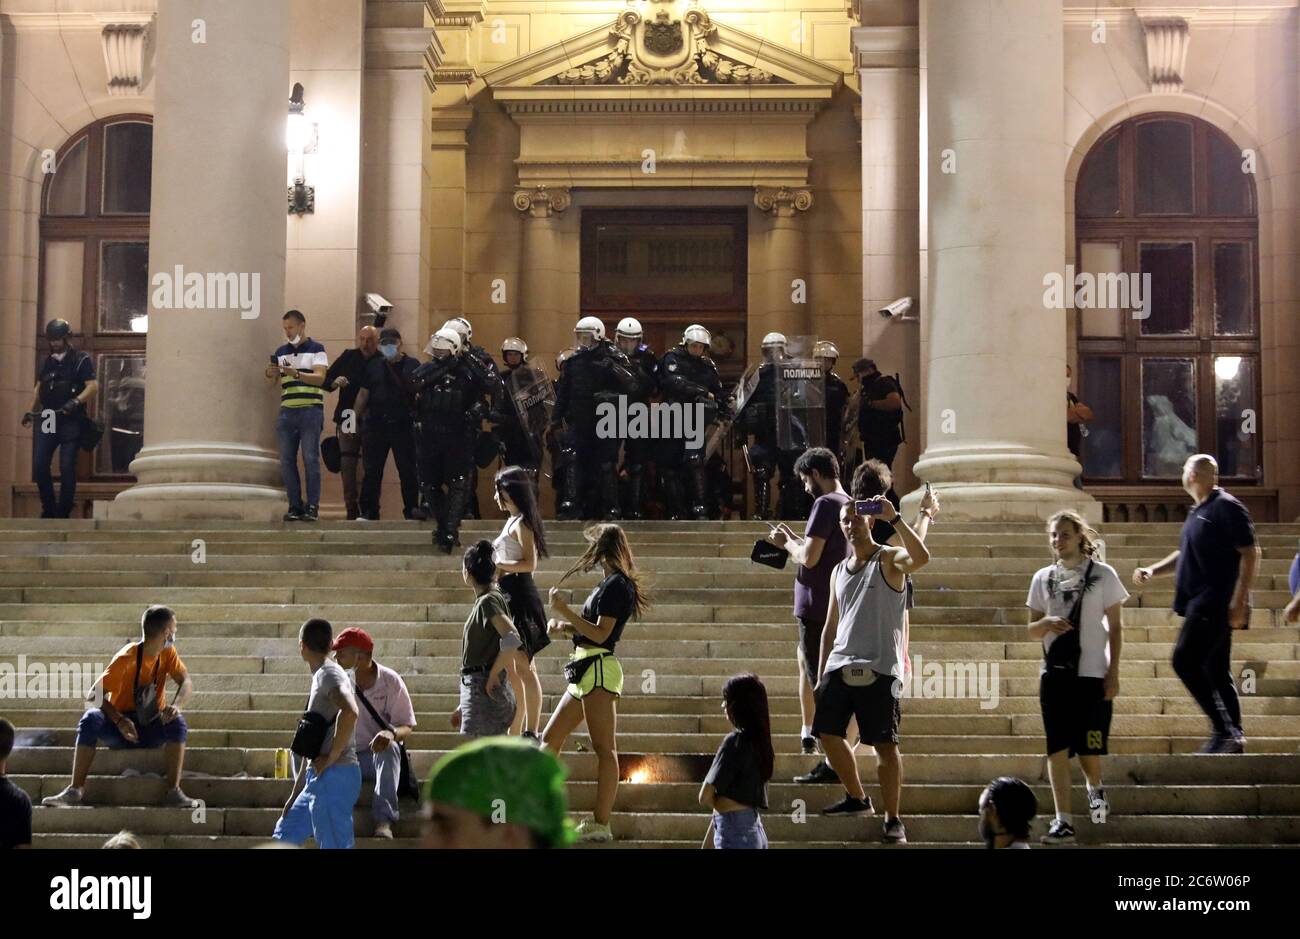 Belgrade, Serbia. 11th July, 2020. Police officers look on during the stand-off with protestors during the protest against the strict measures to fight the coronavirus in Belgrade, Serbia, 11 July 2020. Thousands have gathered in front of the Serbian Parliament in Belgrade to protest the new measures to stem the spread of the SARS-CoV-2 coronavirus, which causes the COVID-19 disease. Credit: Koca Sulejmanovic/Alamy Live News Stock Photo